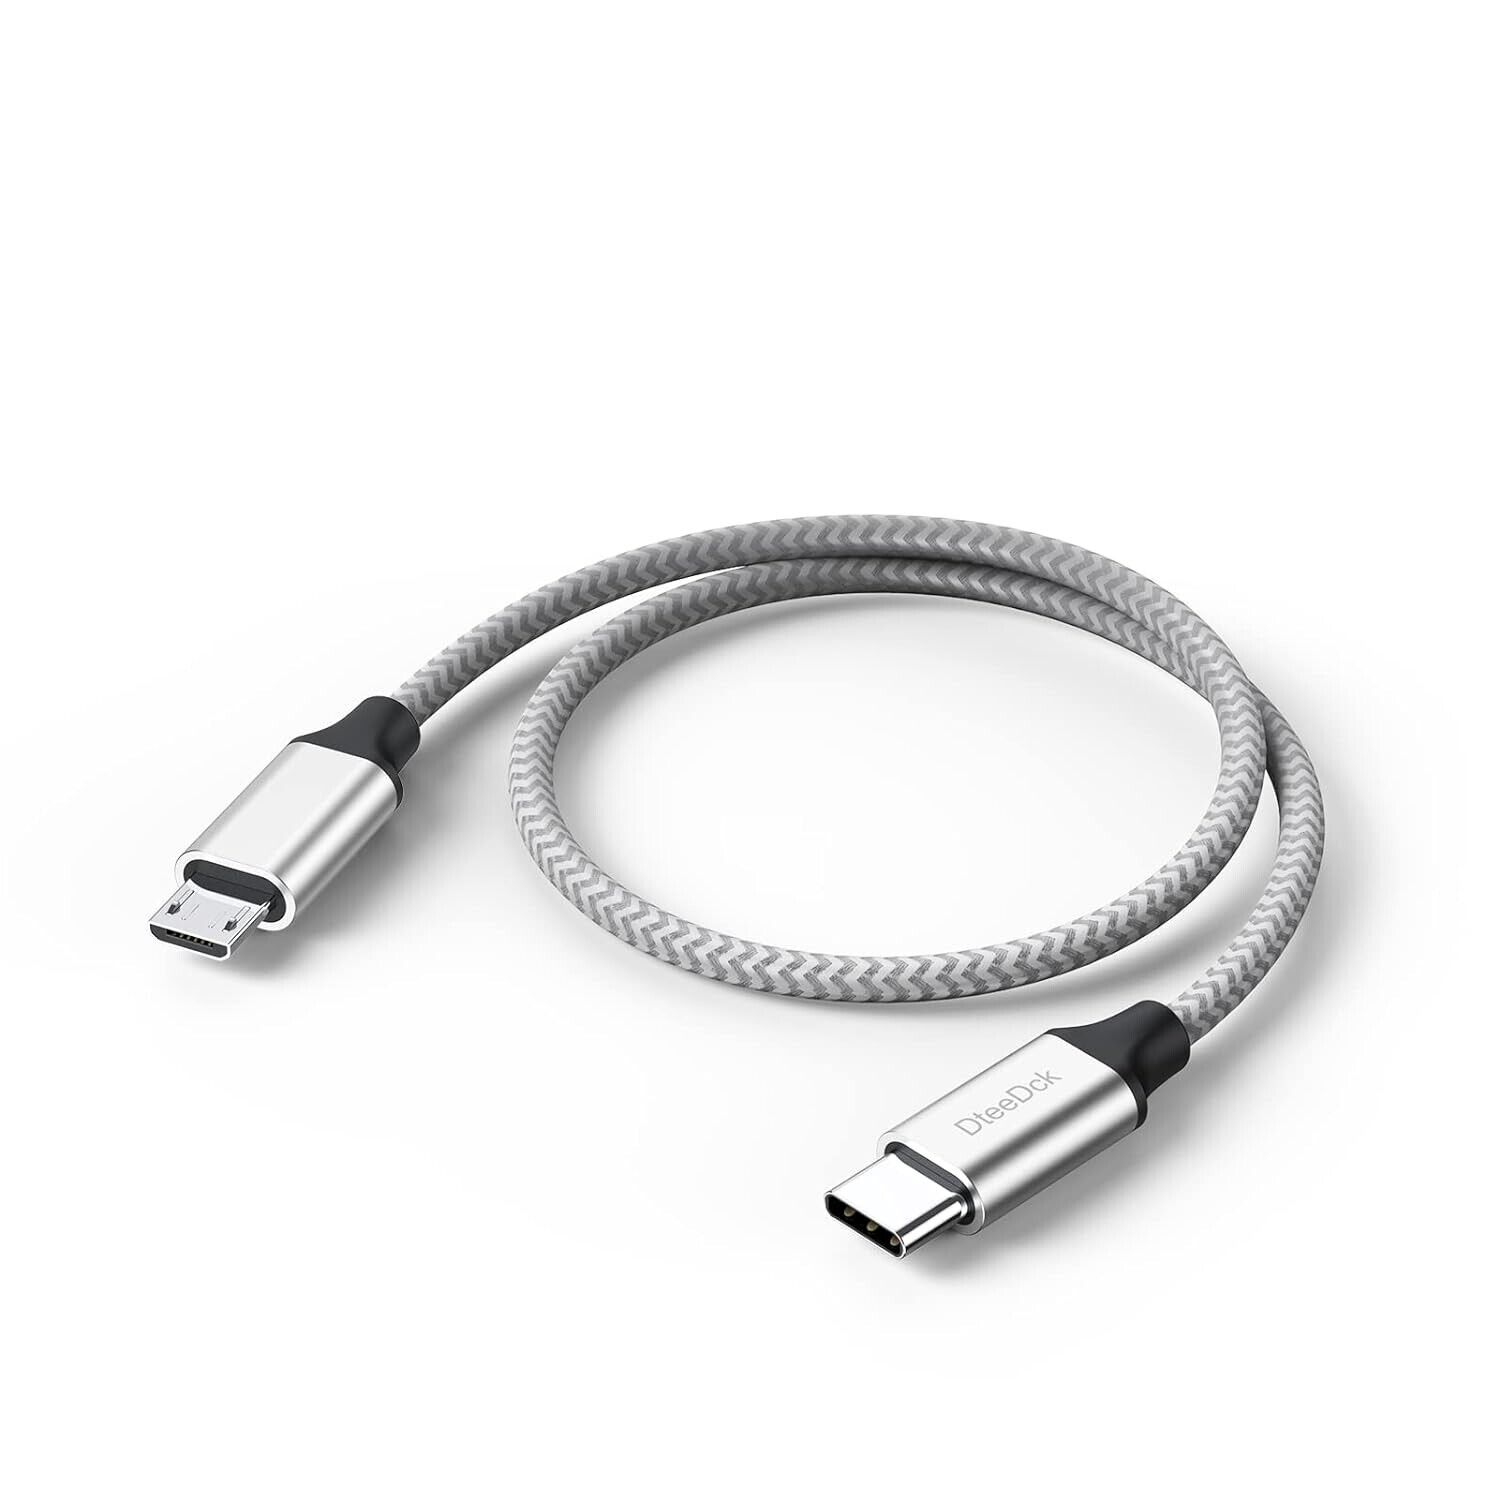 USB C to Micro USB Cable 1ft, Micro USB to USB Type C Adapter Cable Braided Male